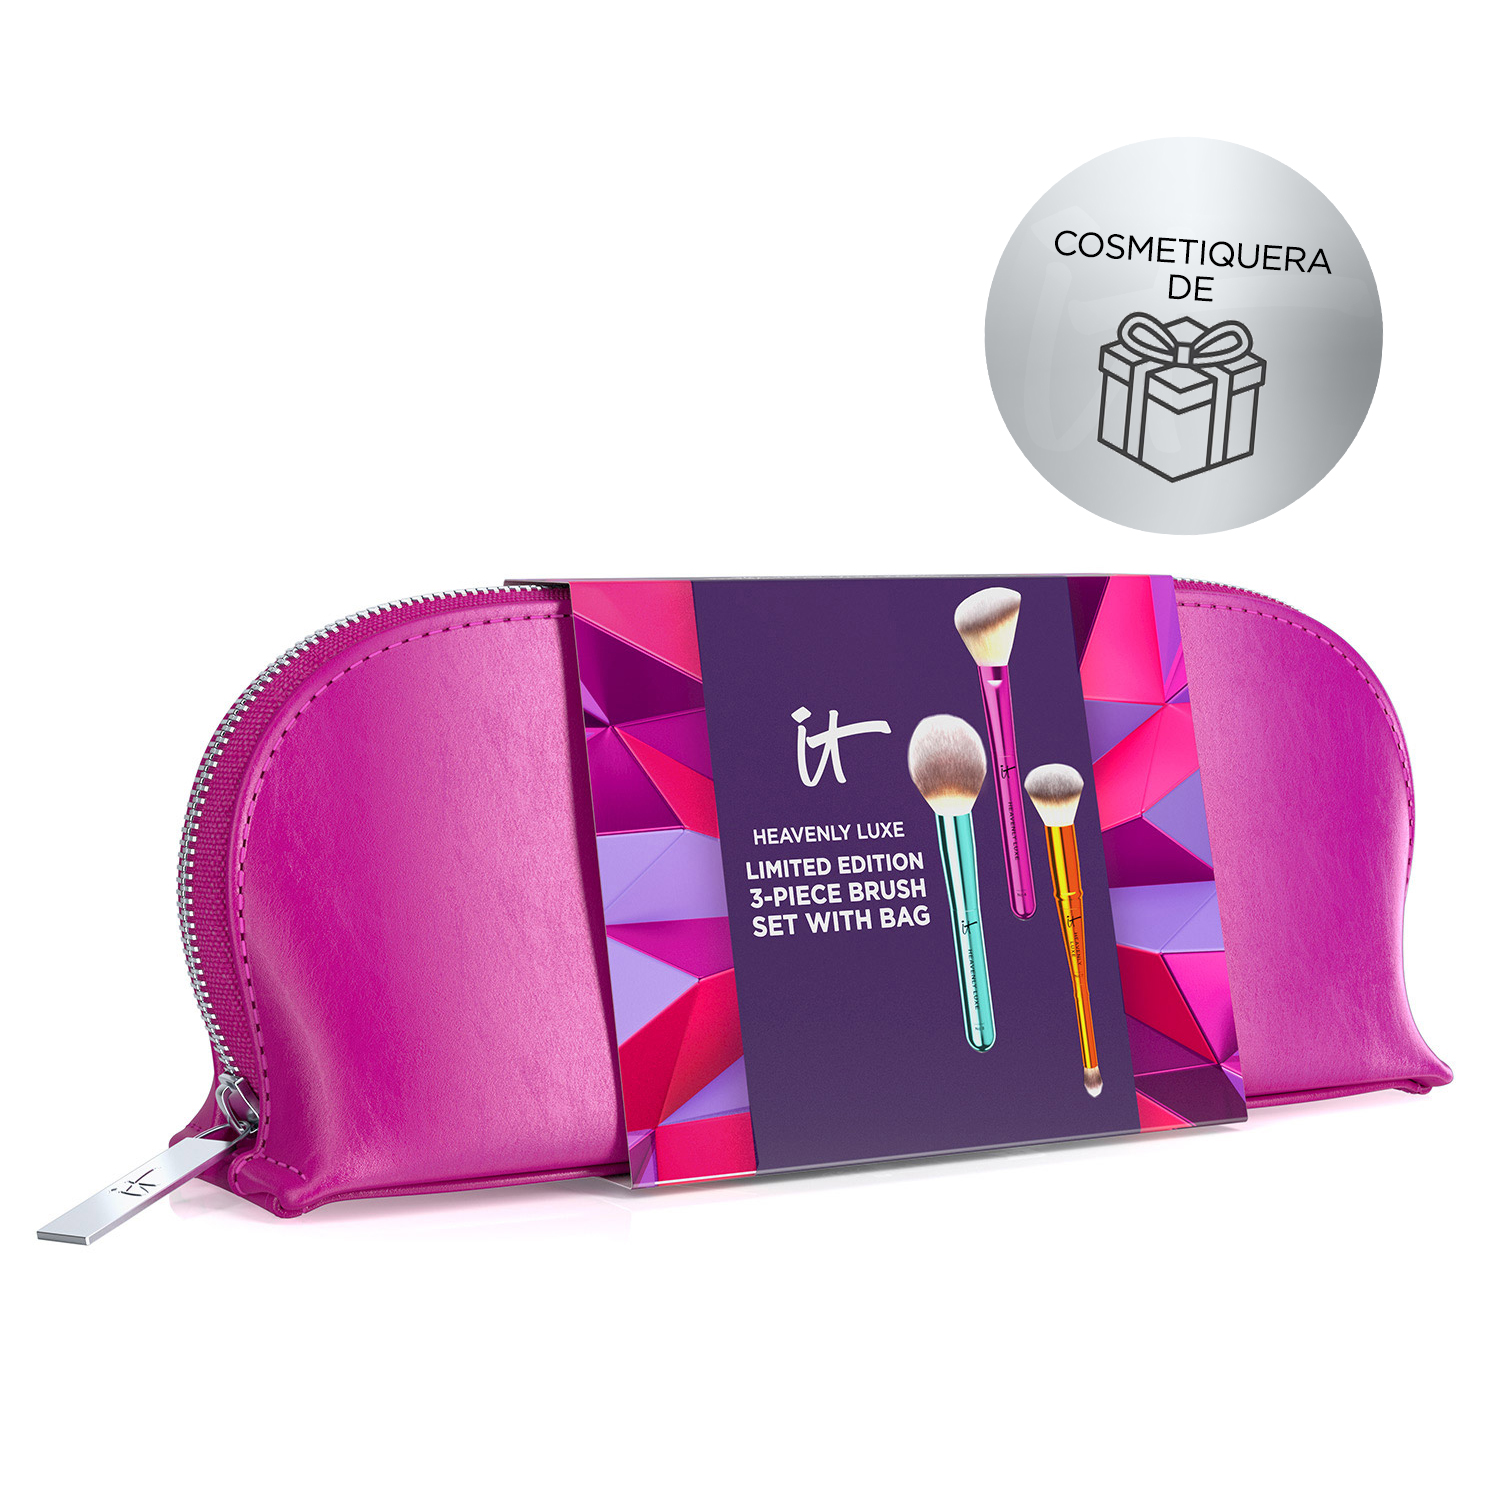 YOUR HEAVENLY LUXE LIMITED-EDITION 3-PC BRUSH SET WITH BAG (SET DE BROCHAS + COSMETIQUERA)